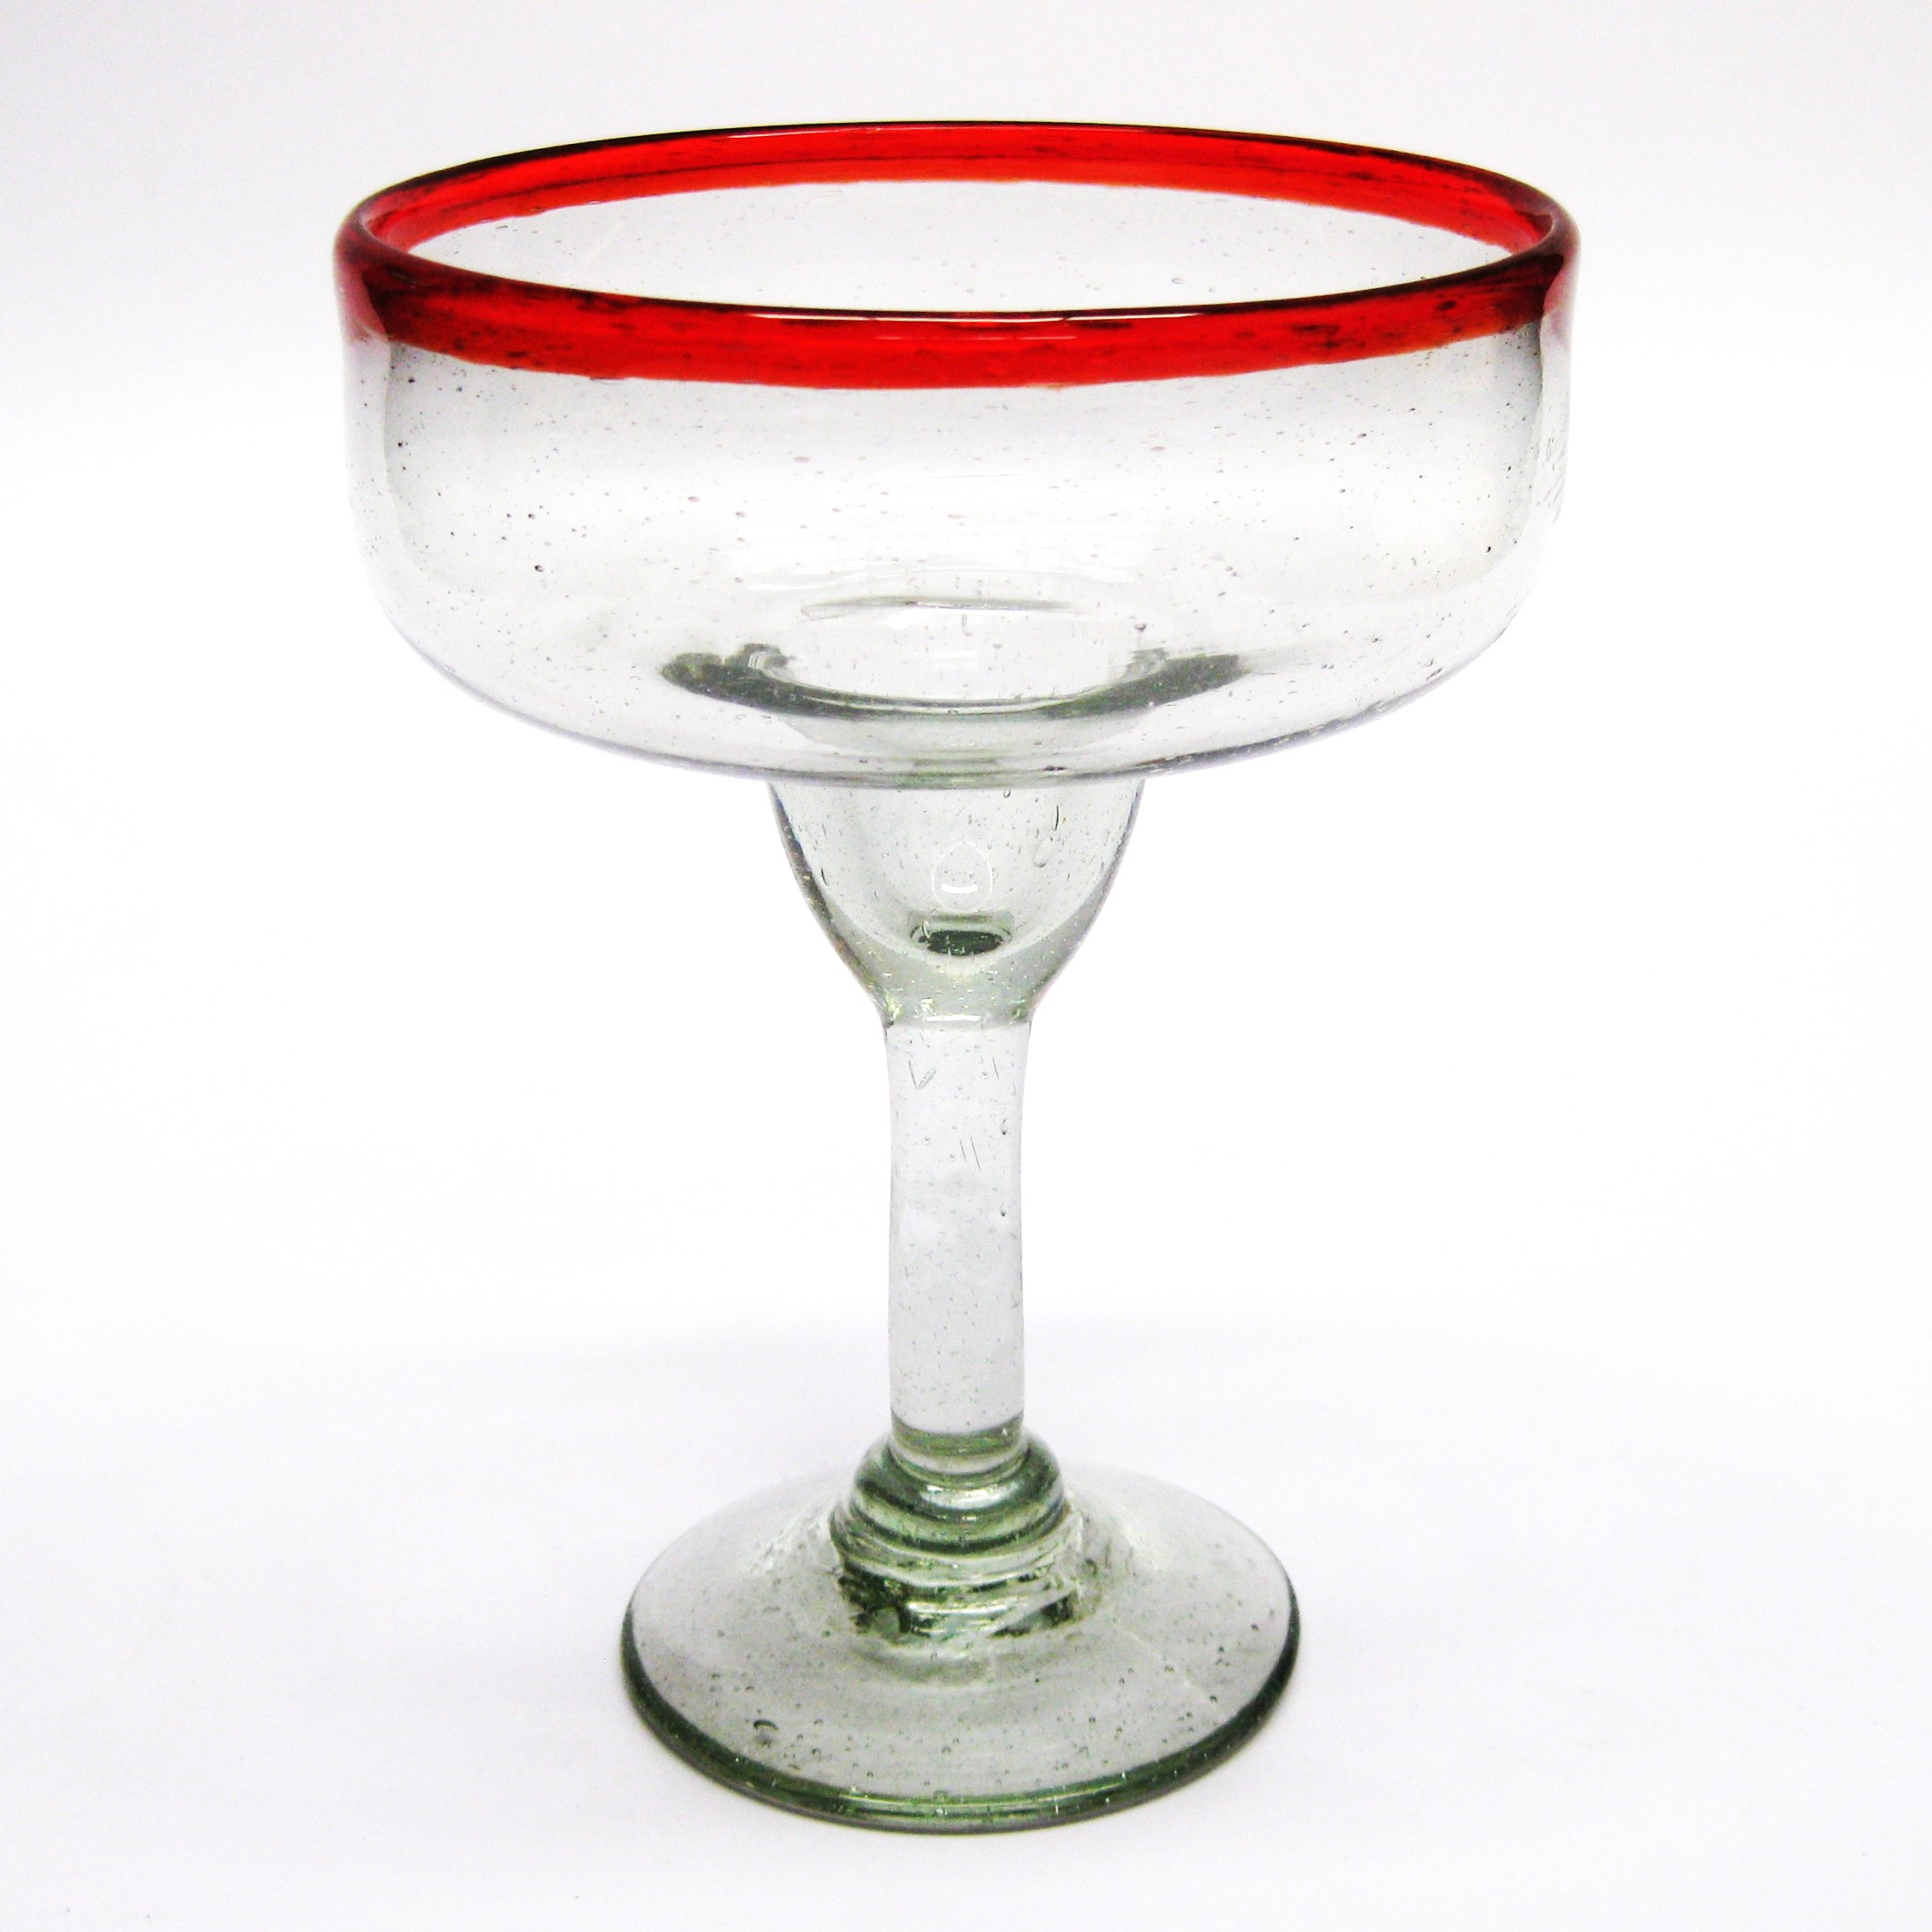 MEXICAN GLASSWARE / Ruby Red Rim 14 oz Large Margarita Glasses (set of 6) / For the margarita lover, these enjoyable large sized margarita glasses feature a cheerful ruby red rim.